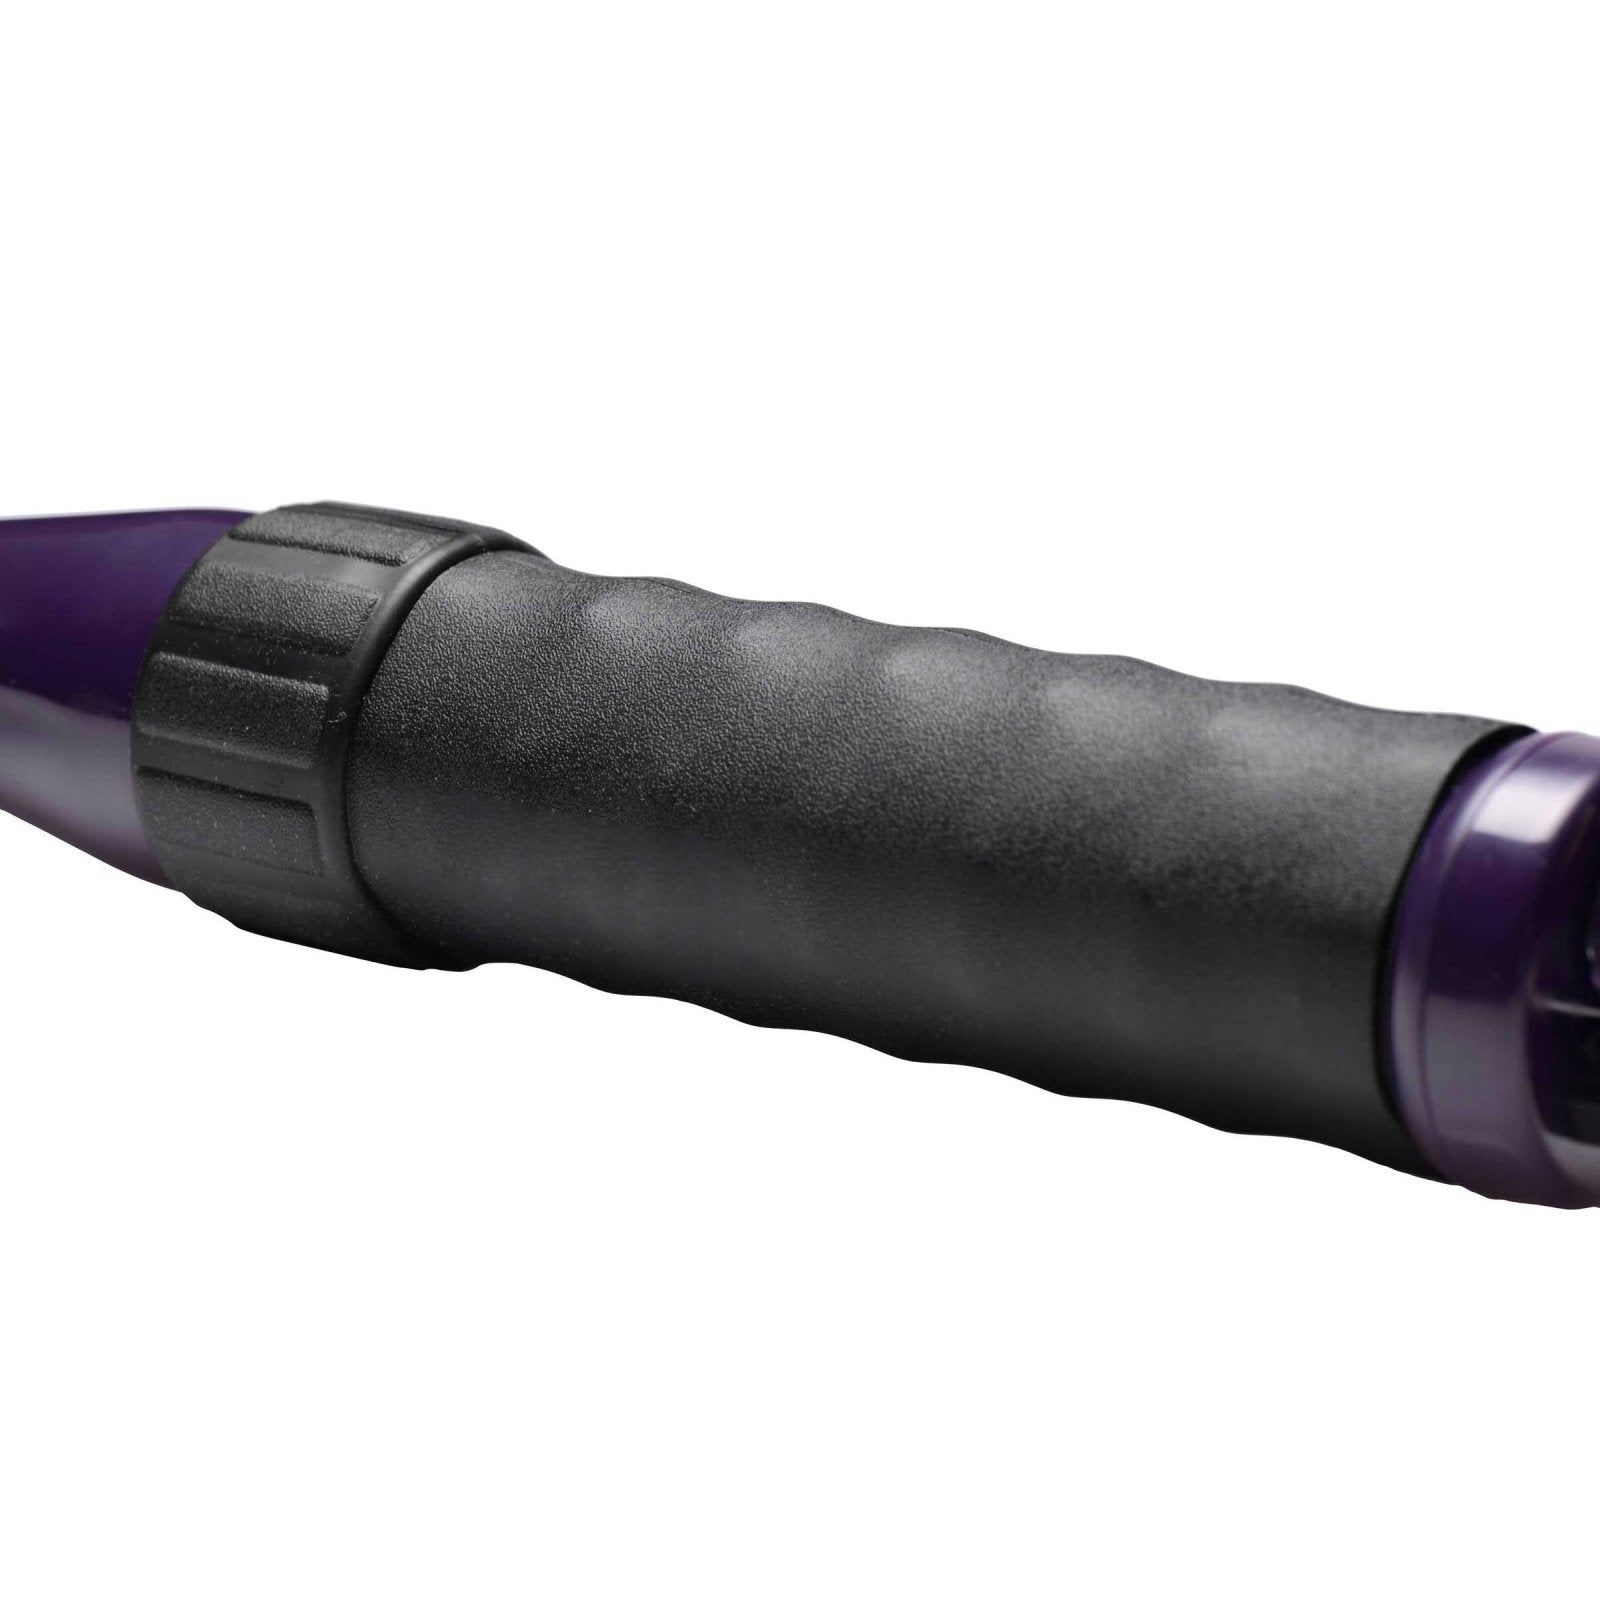 Zeus Deluxe Edition Twilight Violet Wand Kit - Kink Store